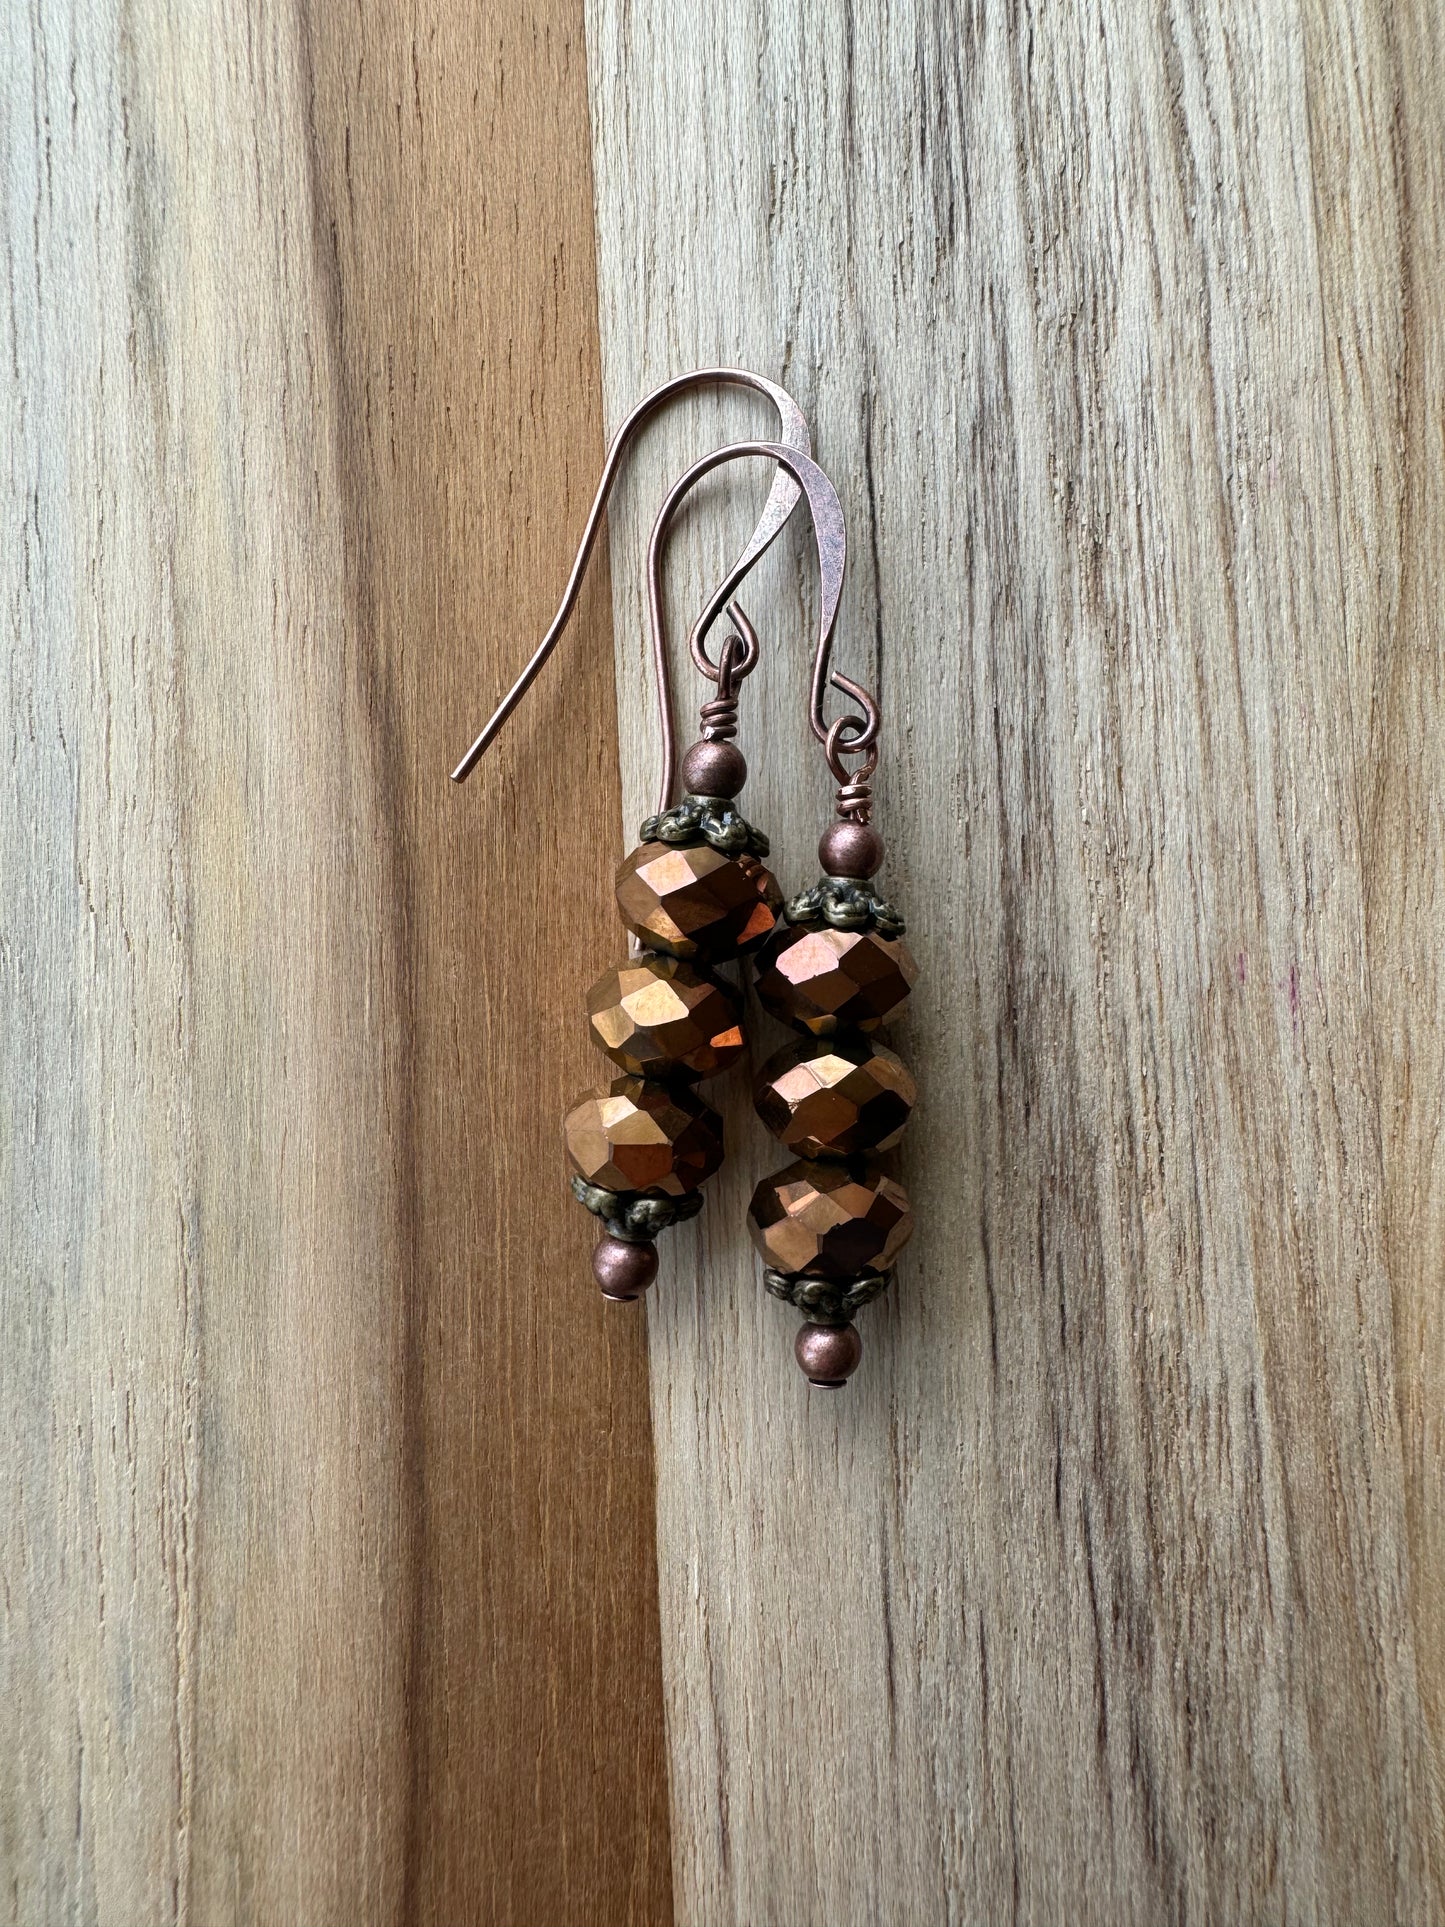 Stacked Metallic Copper Crystal Glass Dangle Earrings with Antique Bronze and Copper Accent Beads - My Urban Gems